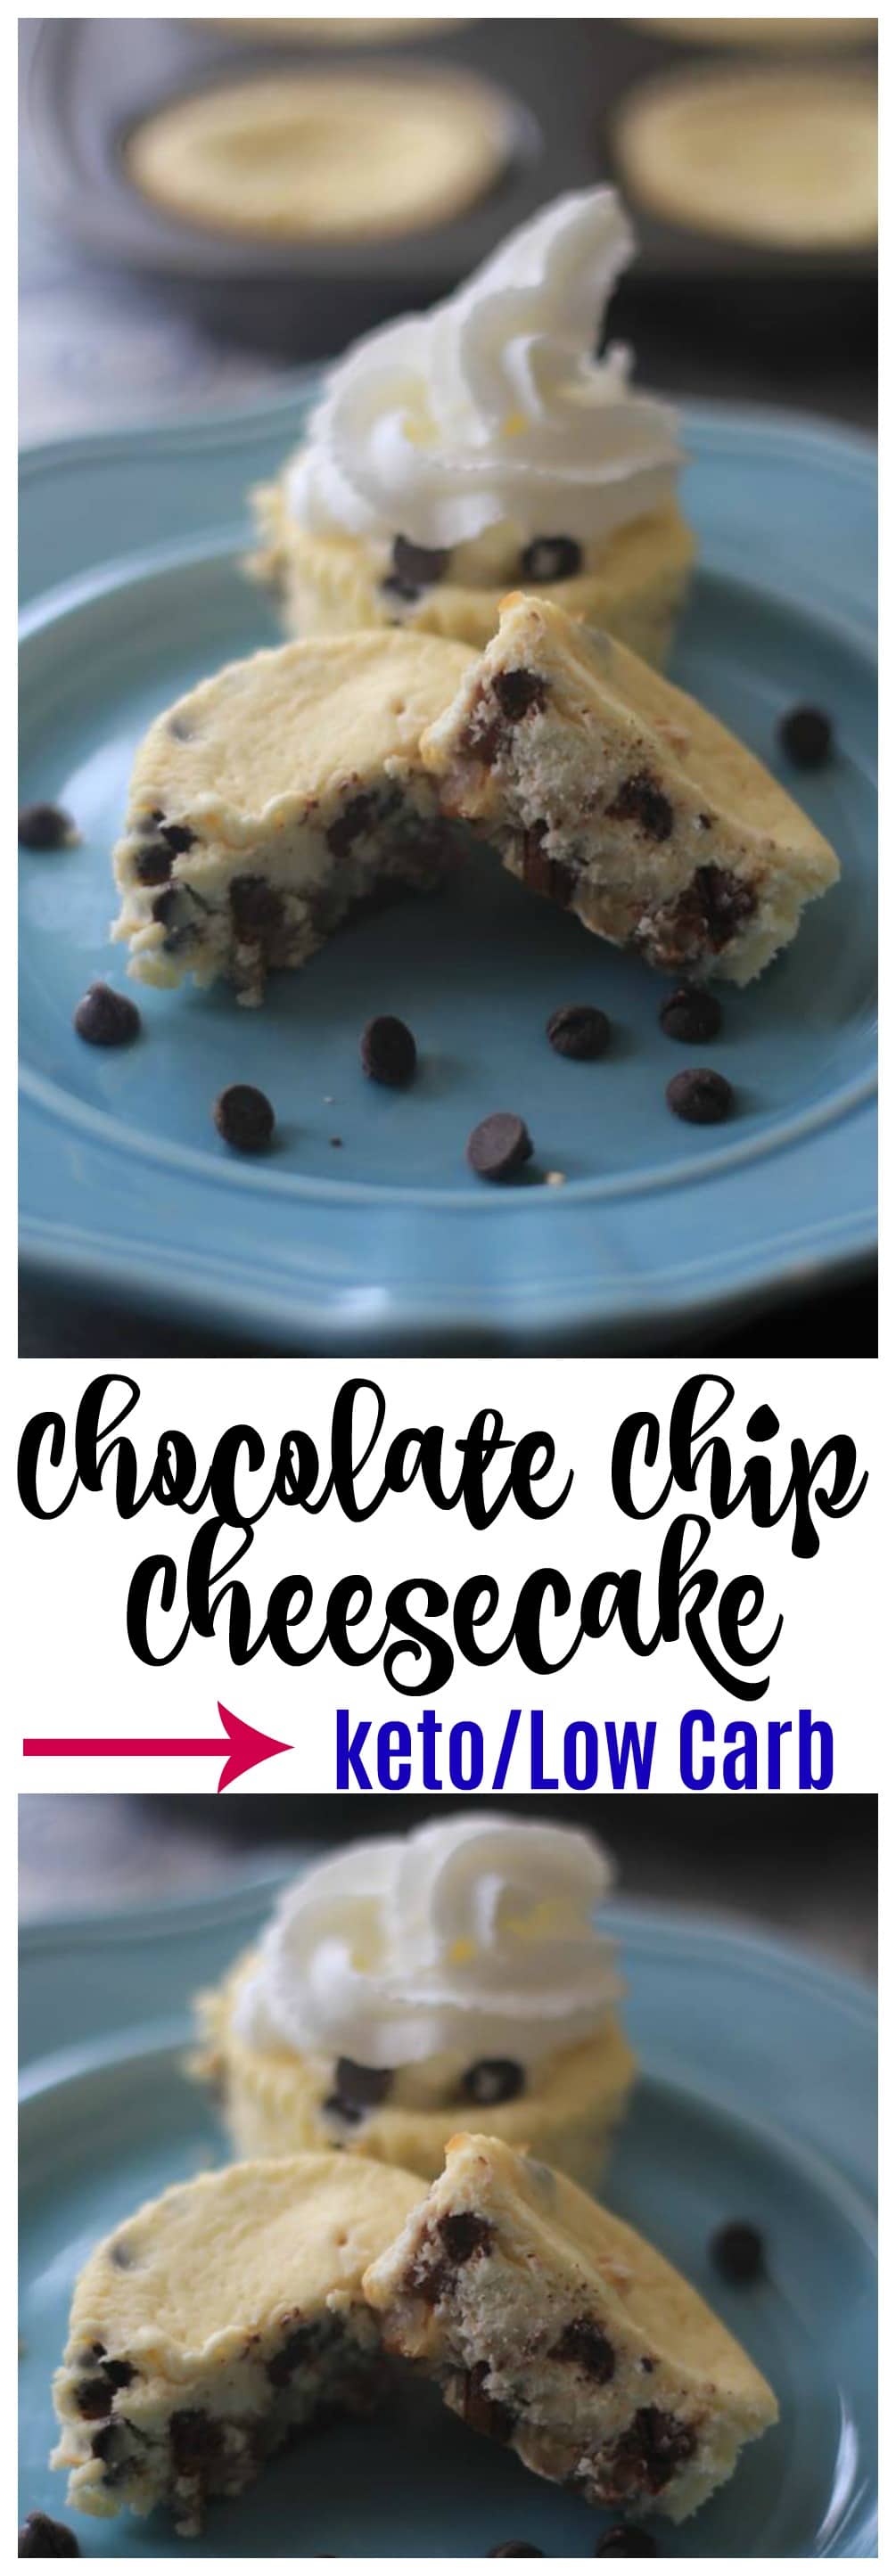 Keto Chocolate Chip Mini Cheesecake Recipe is going to become a favorite on your low carb journey. These are so easy to whip up and serve! Keto cheesecake is one of the best parts of the low carb diet. 